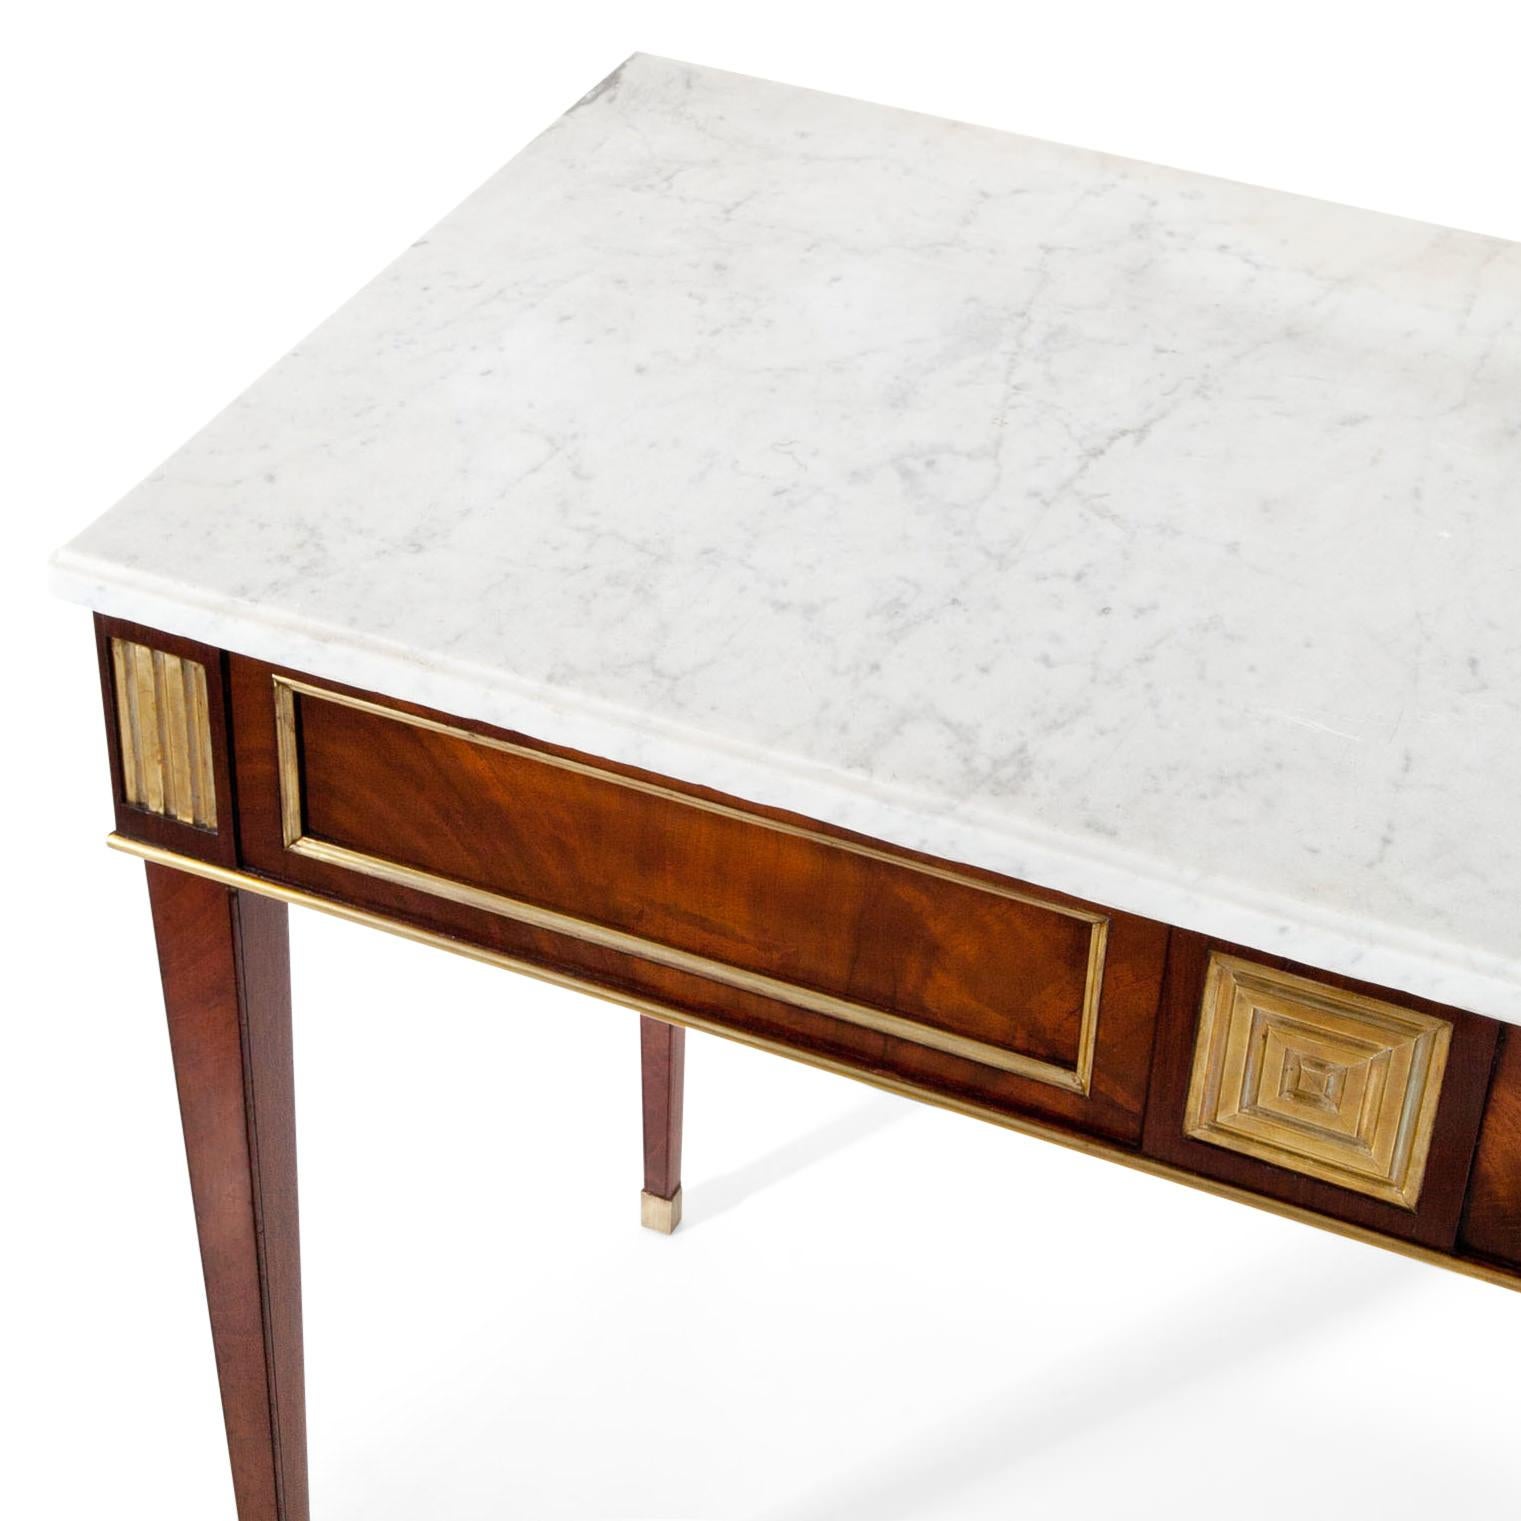 Console table standing on tall tapered legs with brass caps. The straight apron shows fillings with brass molding as well as geometrical applications. The white marble-top is recent.